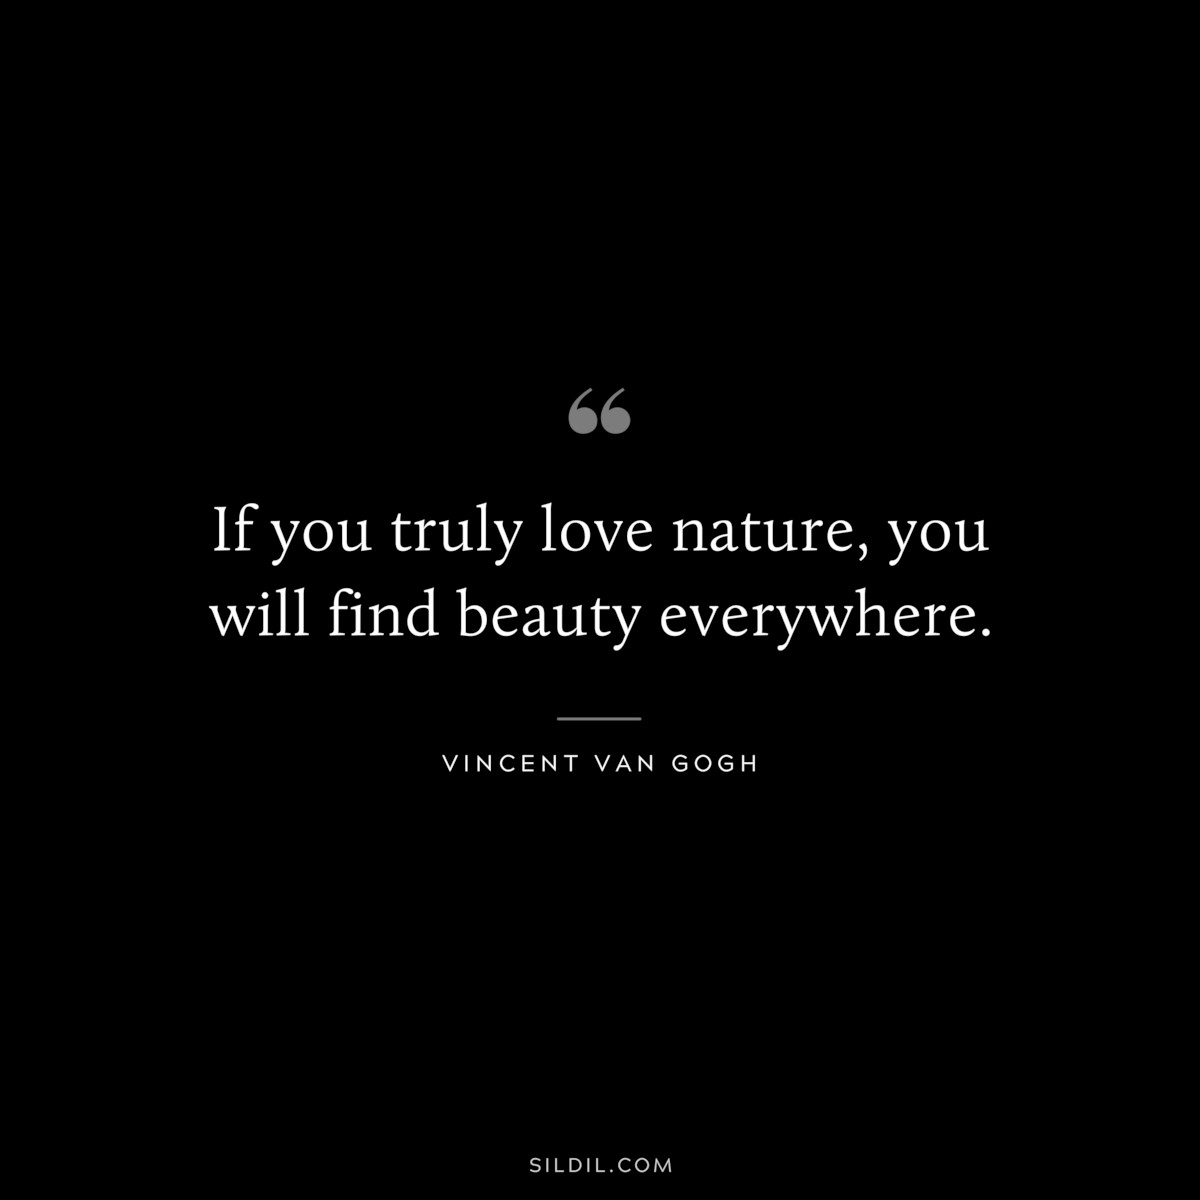 If you truly love nature, you will find beauty everywhere. ― Vincent van Gogh